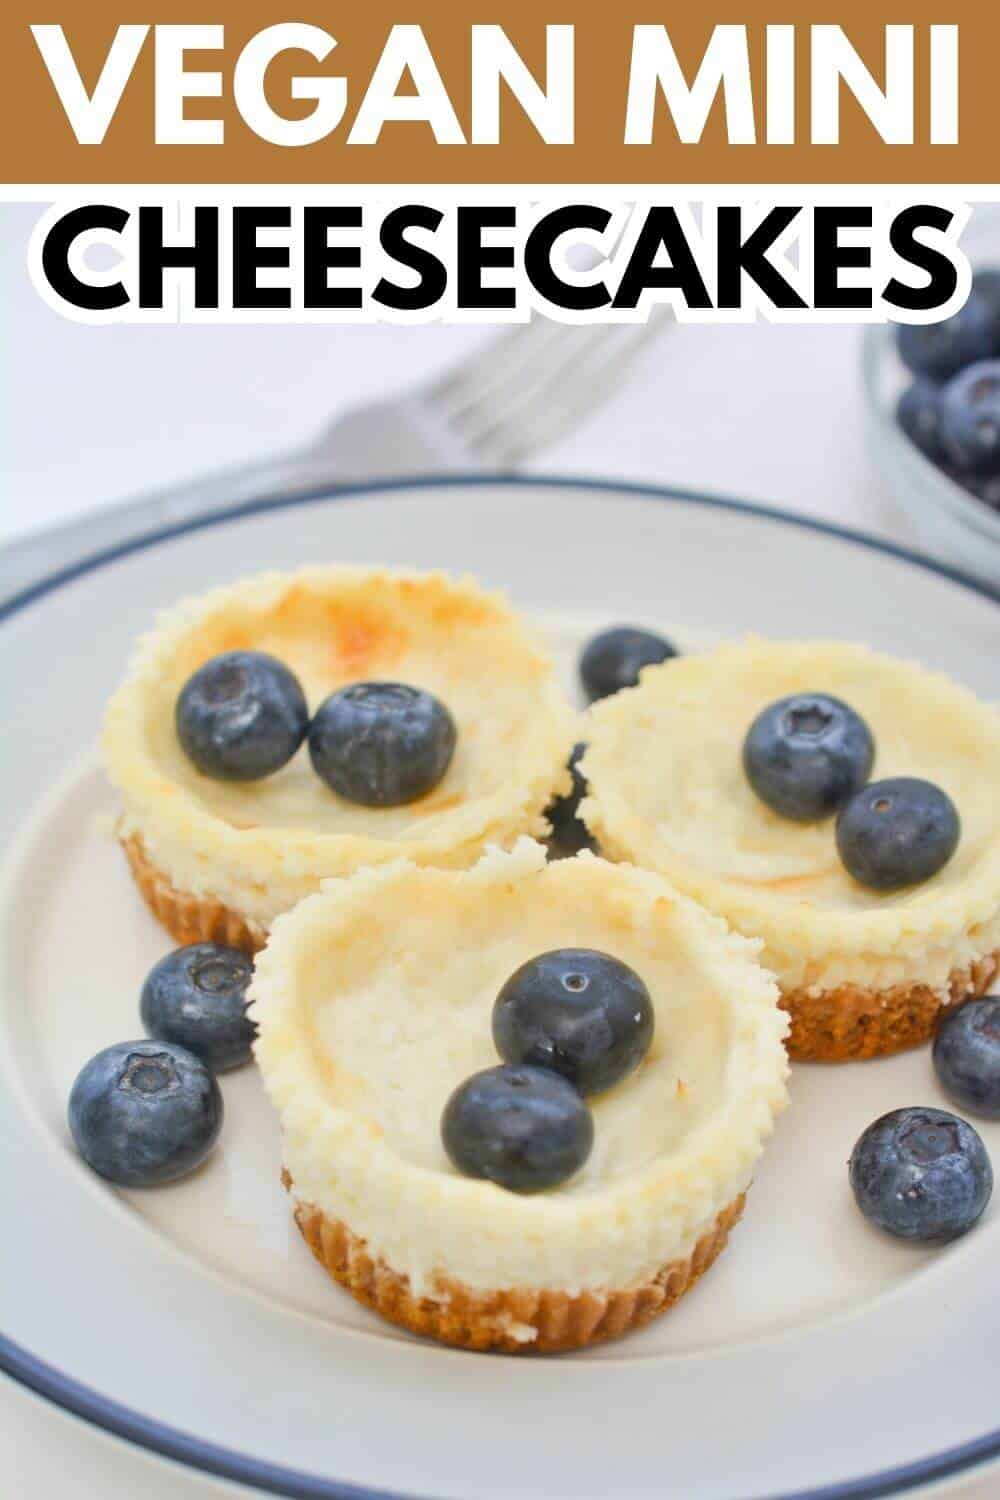 Vegan mini cheesecakes with title text overlay.